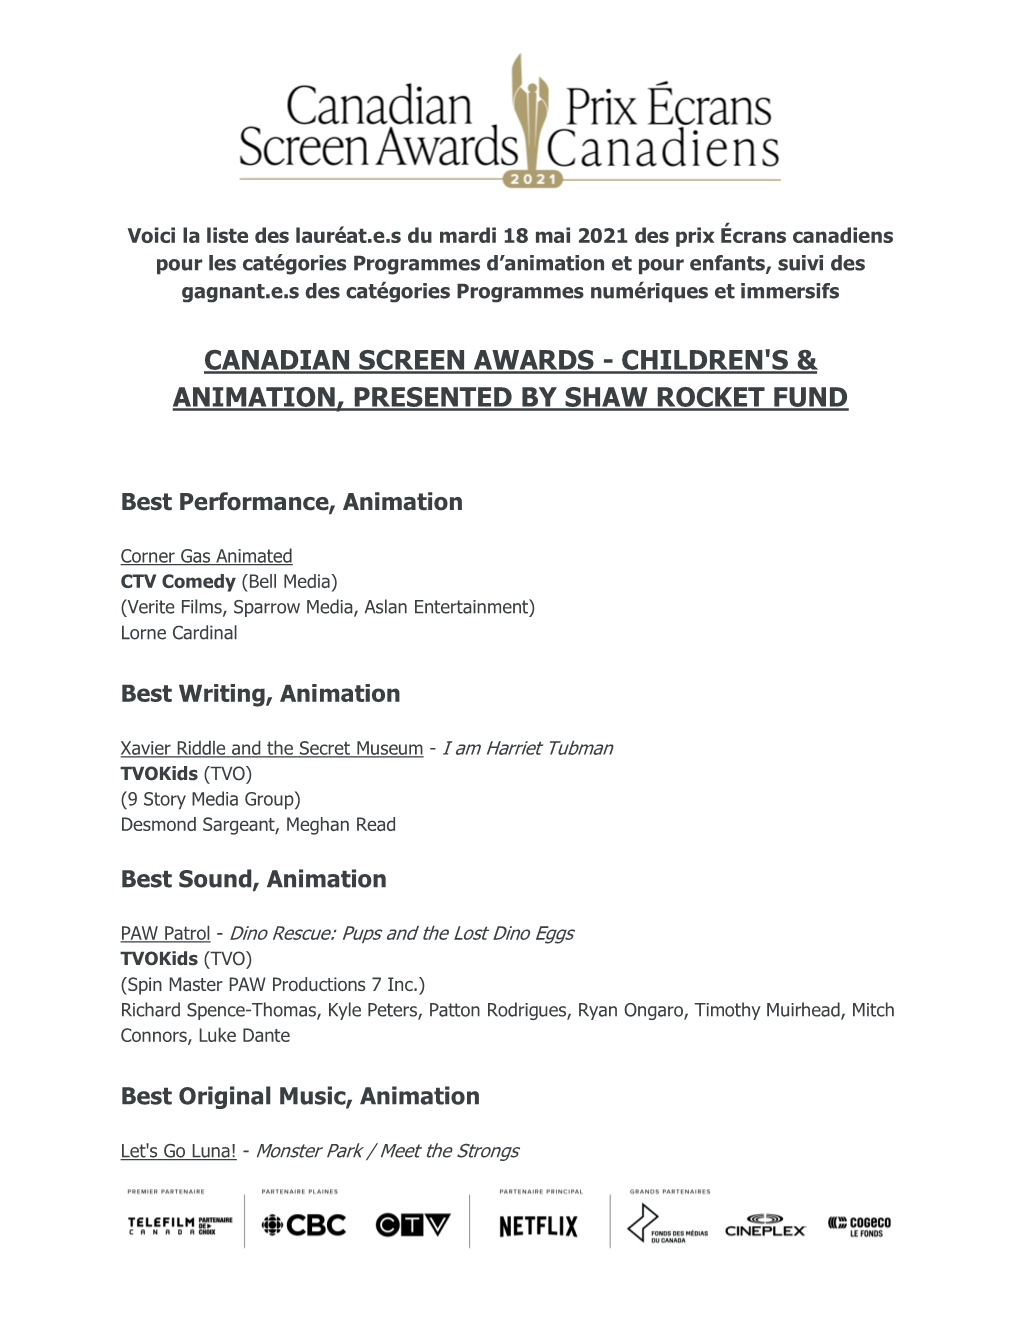 Canadian Screen Awards - Children's & Animation, Presented by Shaw Rocket Fund